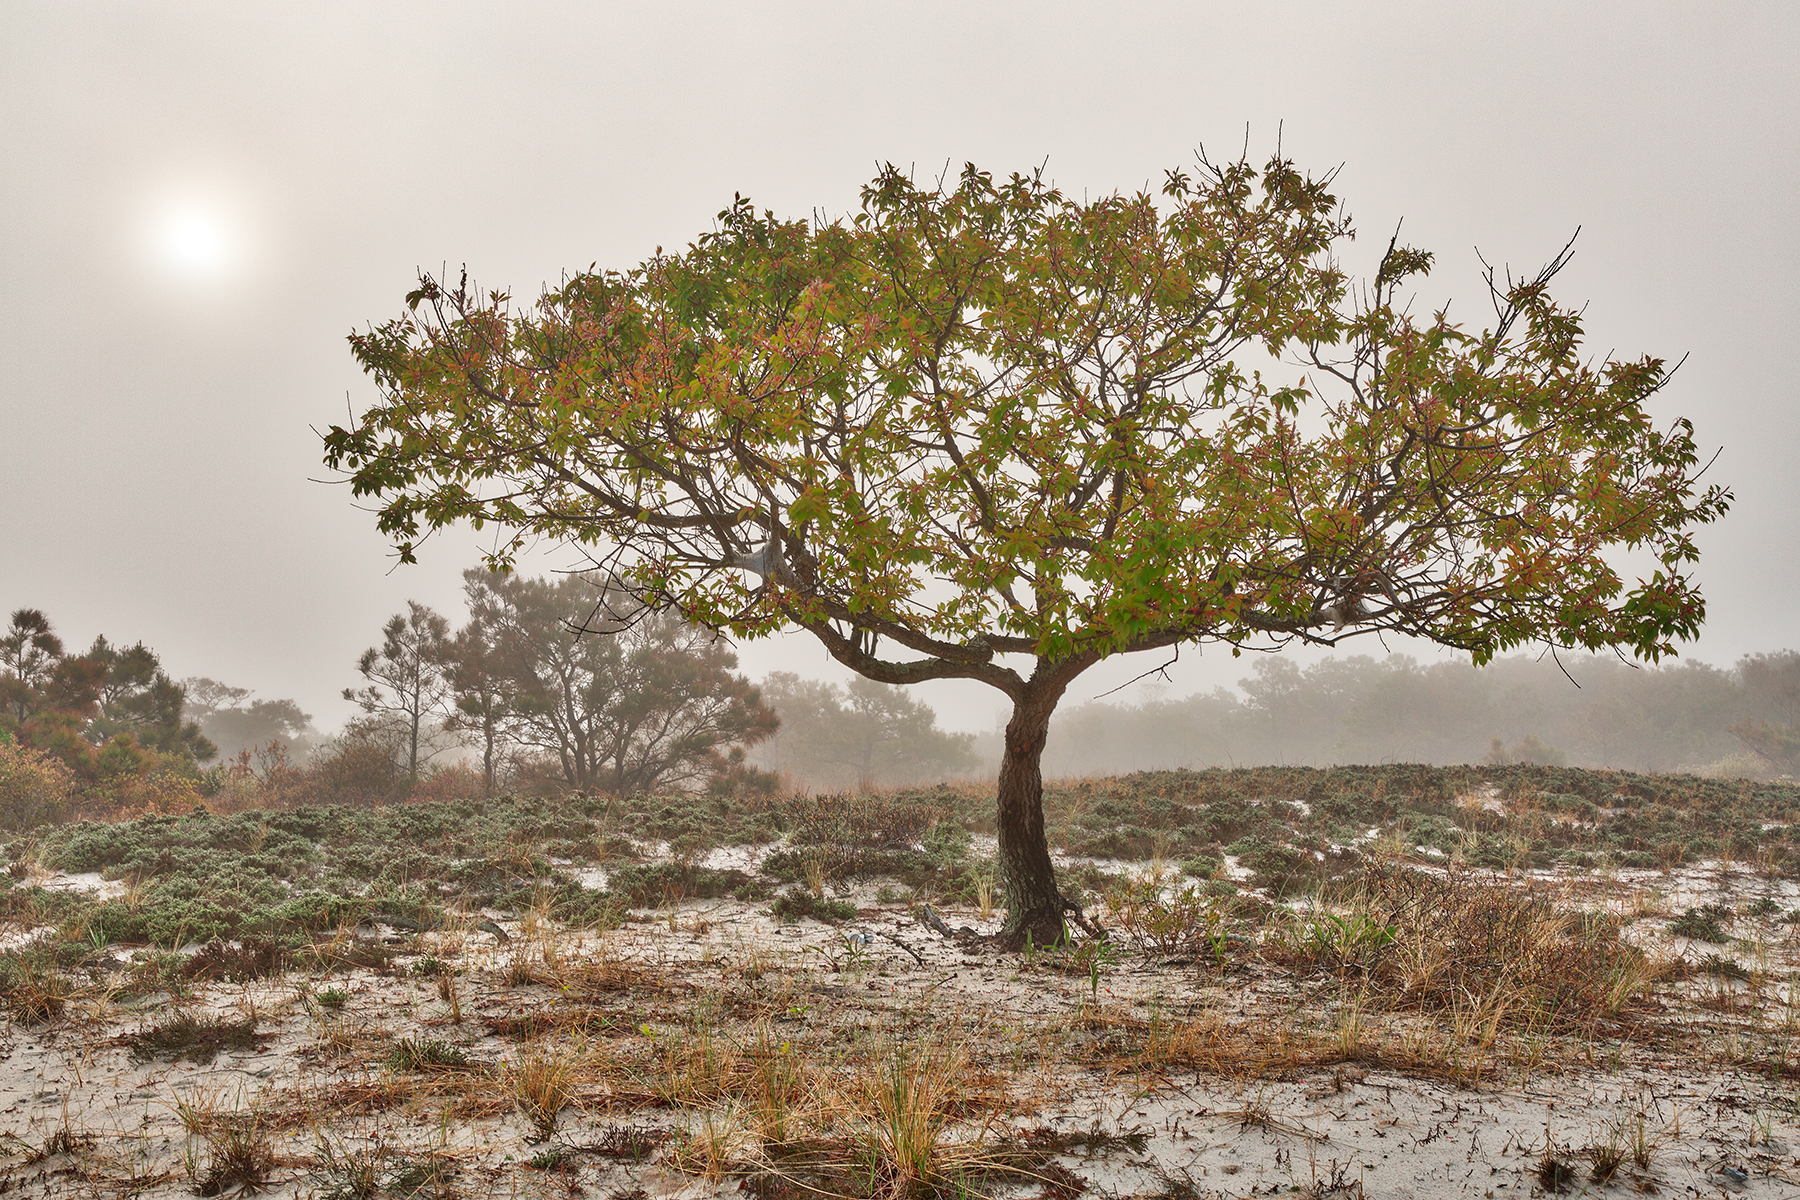 Glowing mist of assateague island - hdr photo